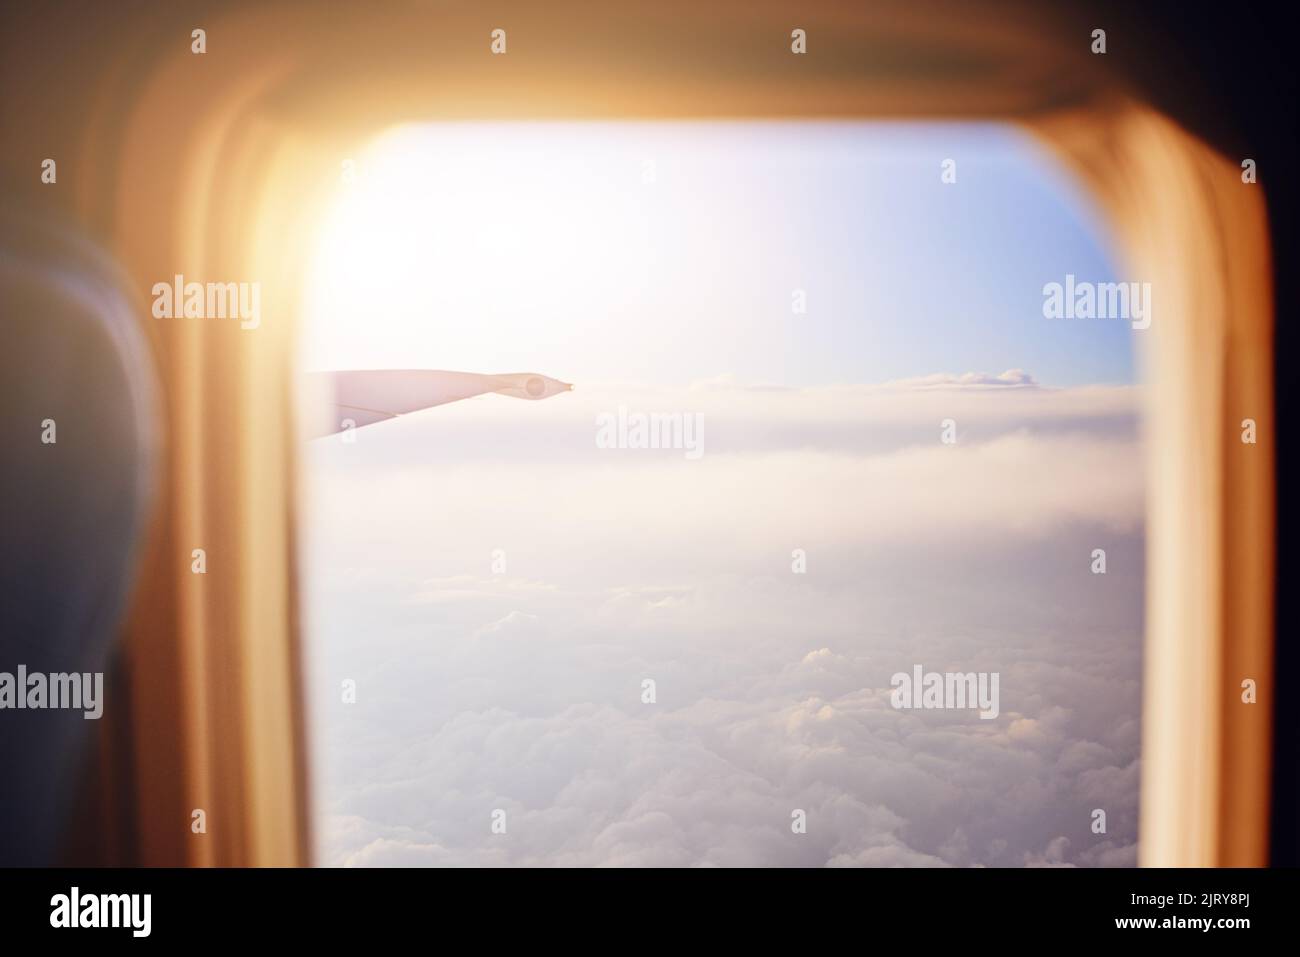 Time to make some memories all over the world. the view through an airplane window. Stock Photo